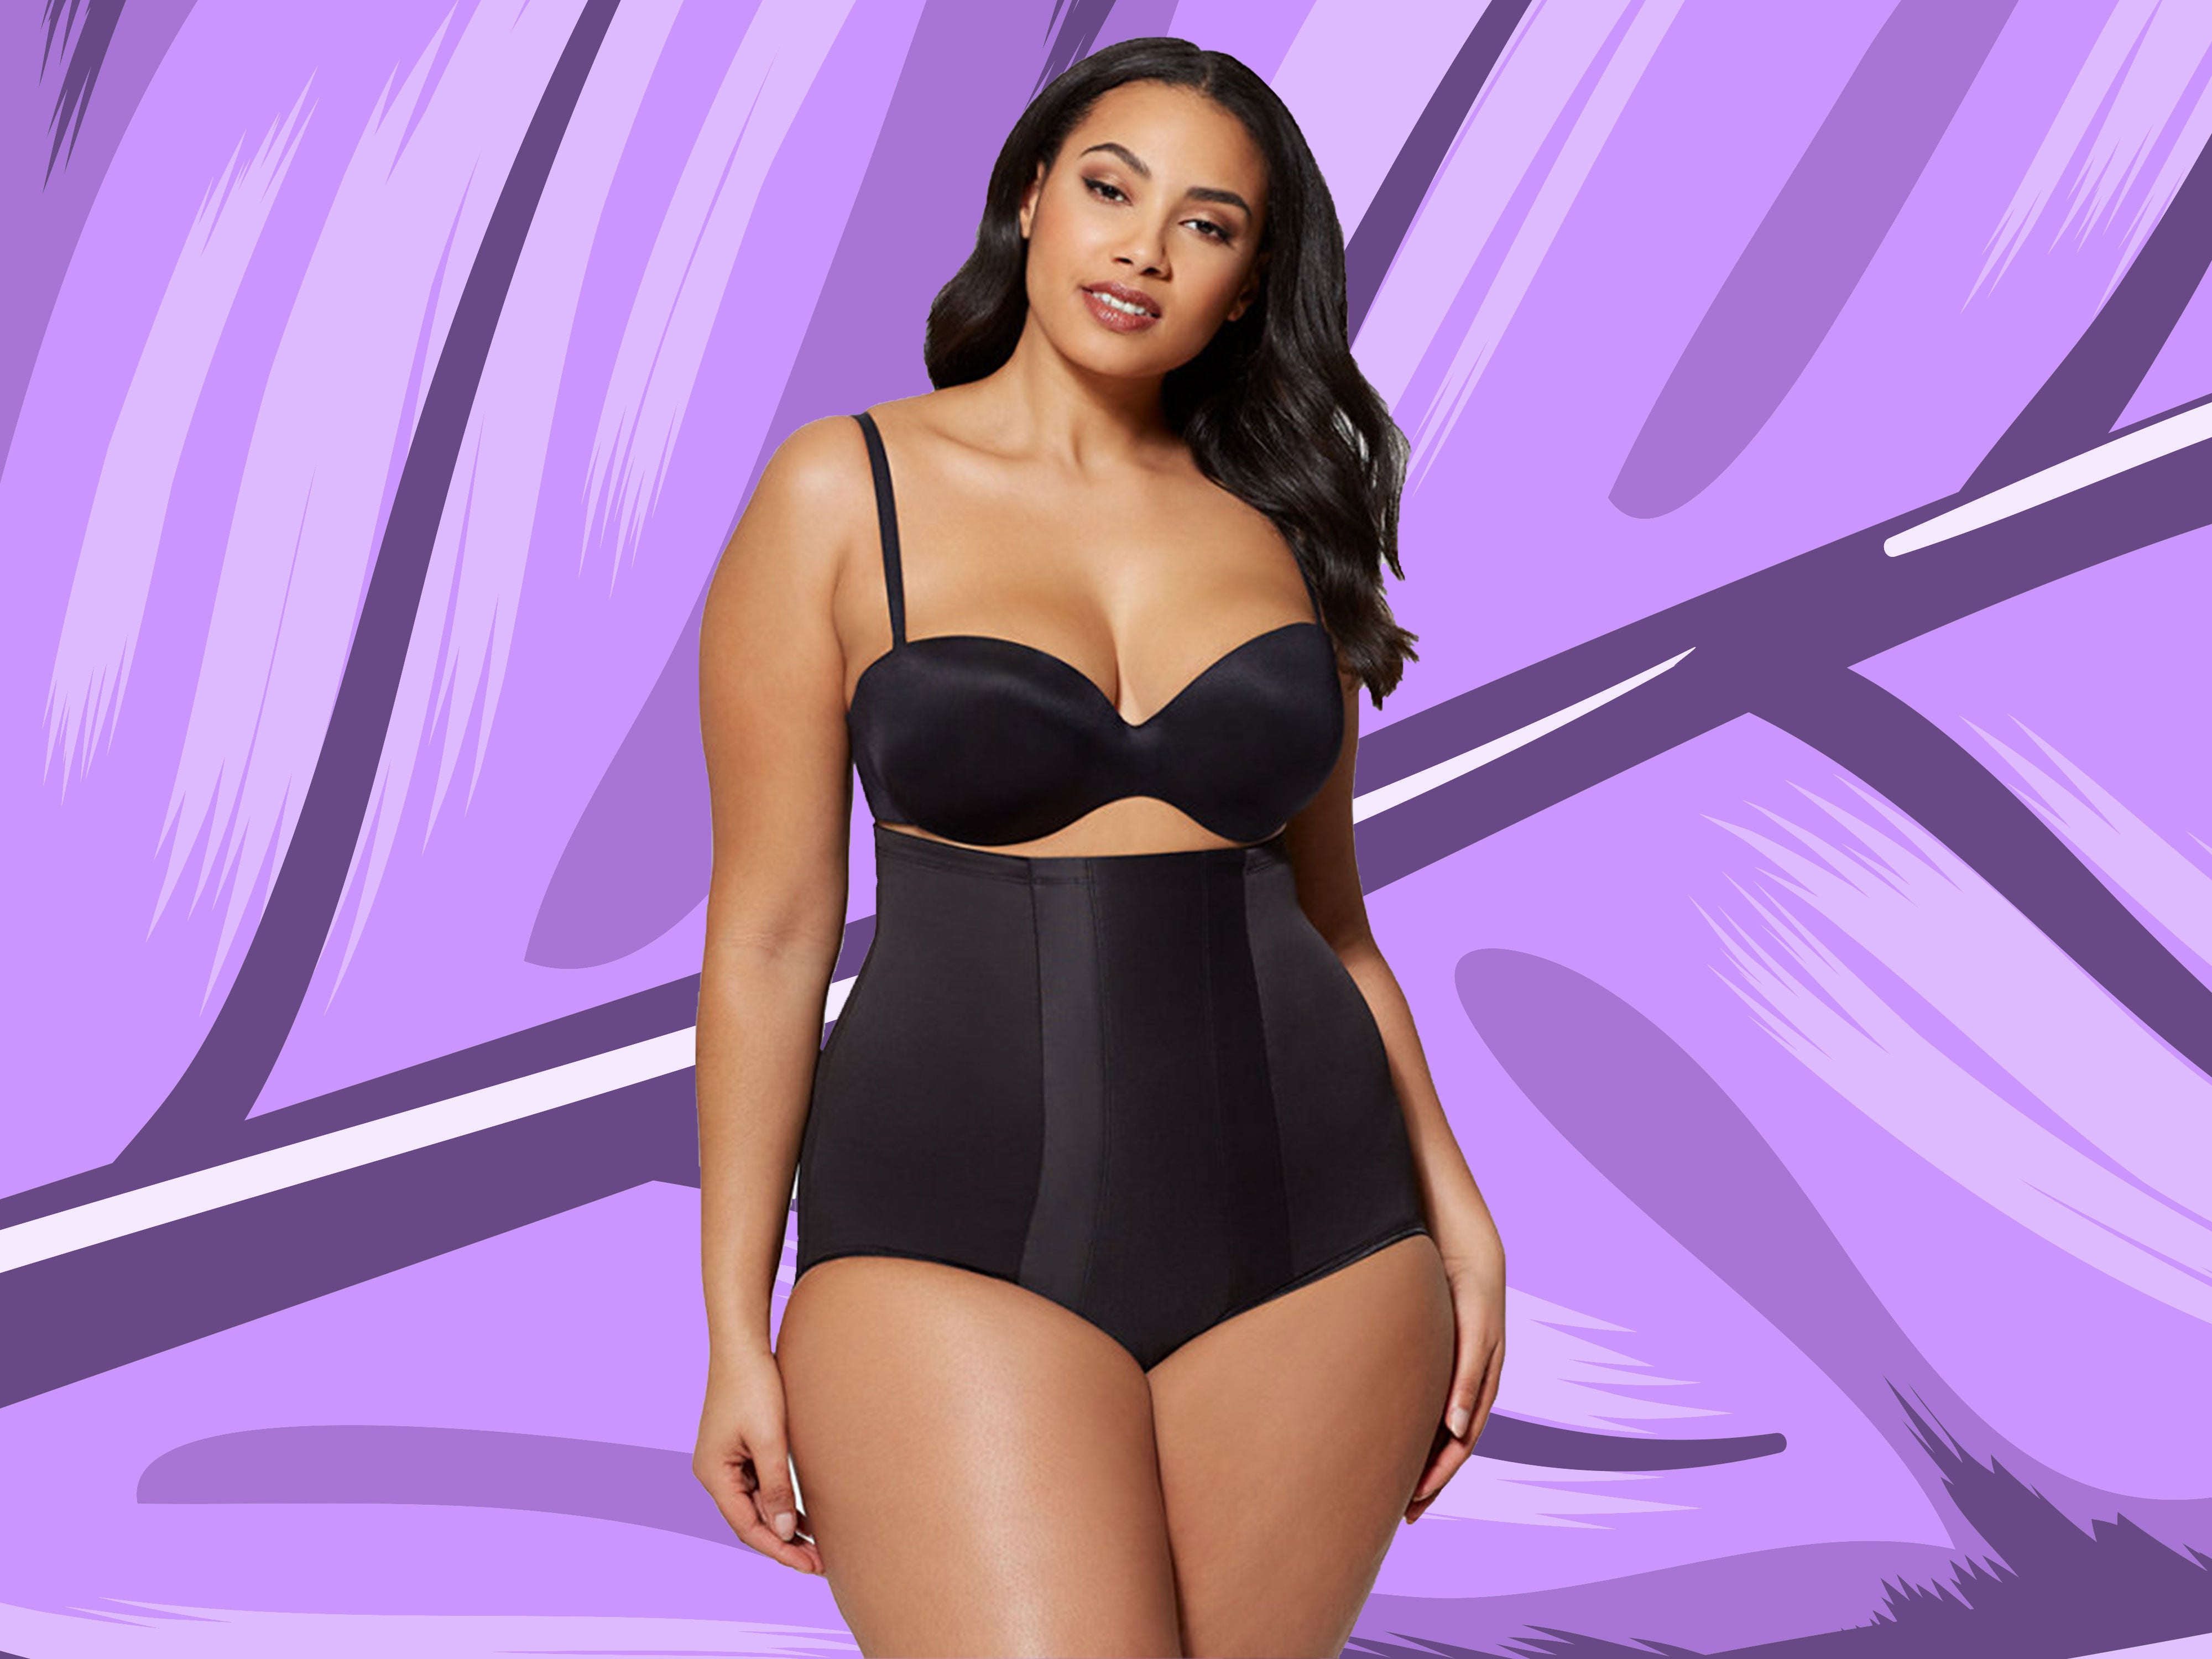 Look and feel your best with SPANX shapewear! Now available in petite